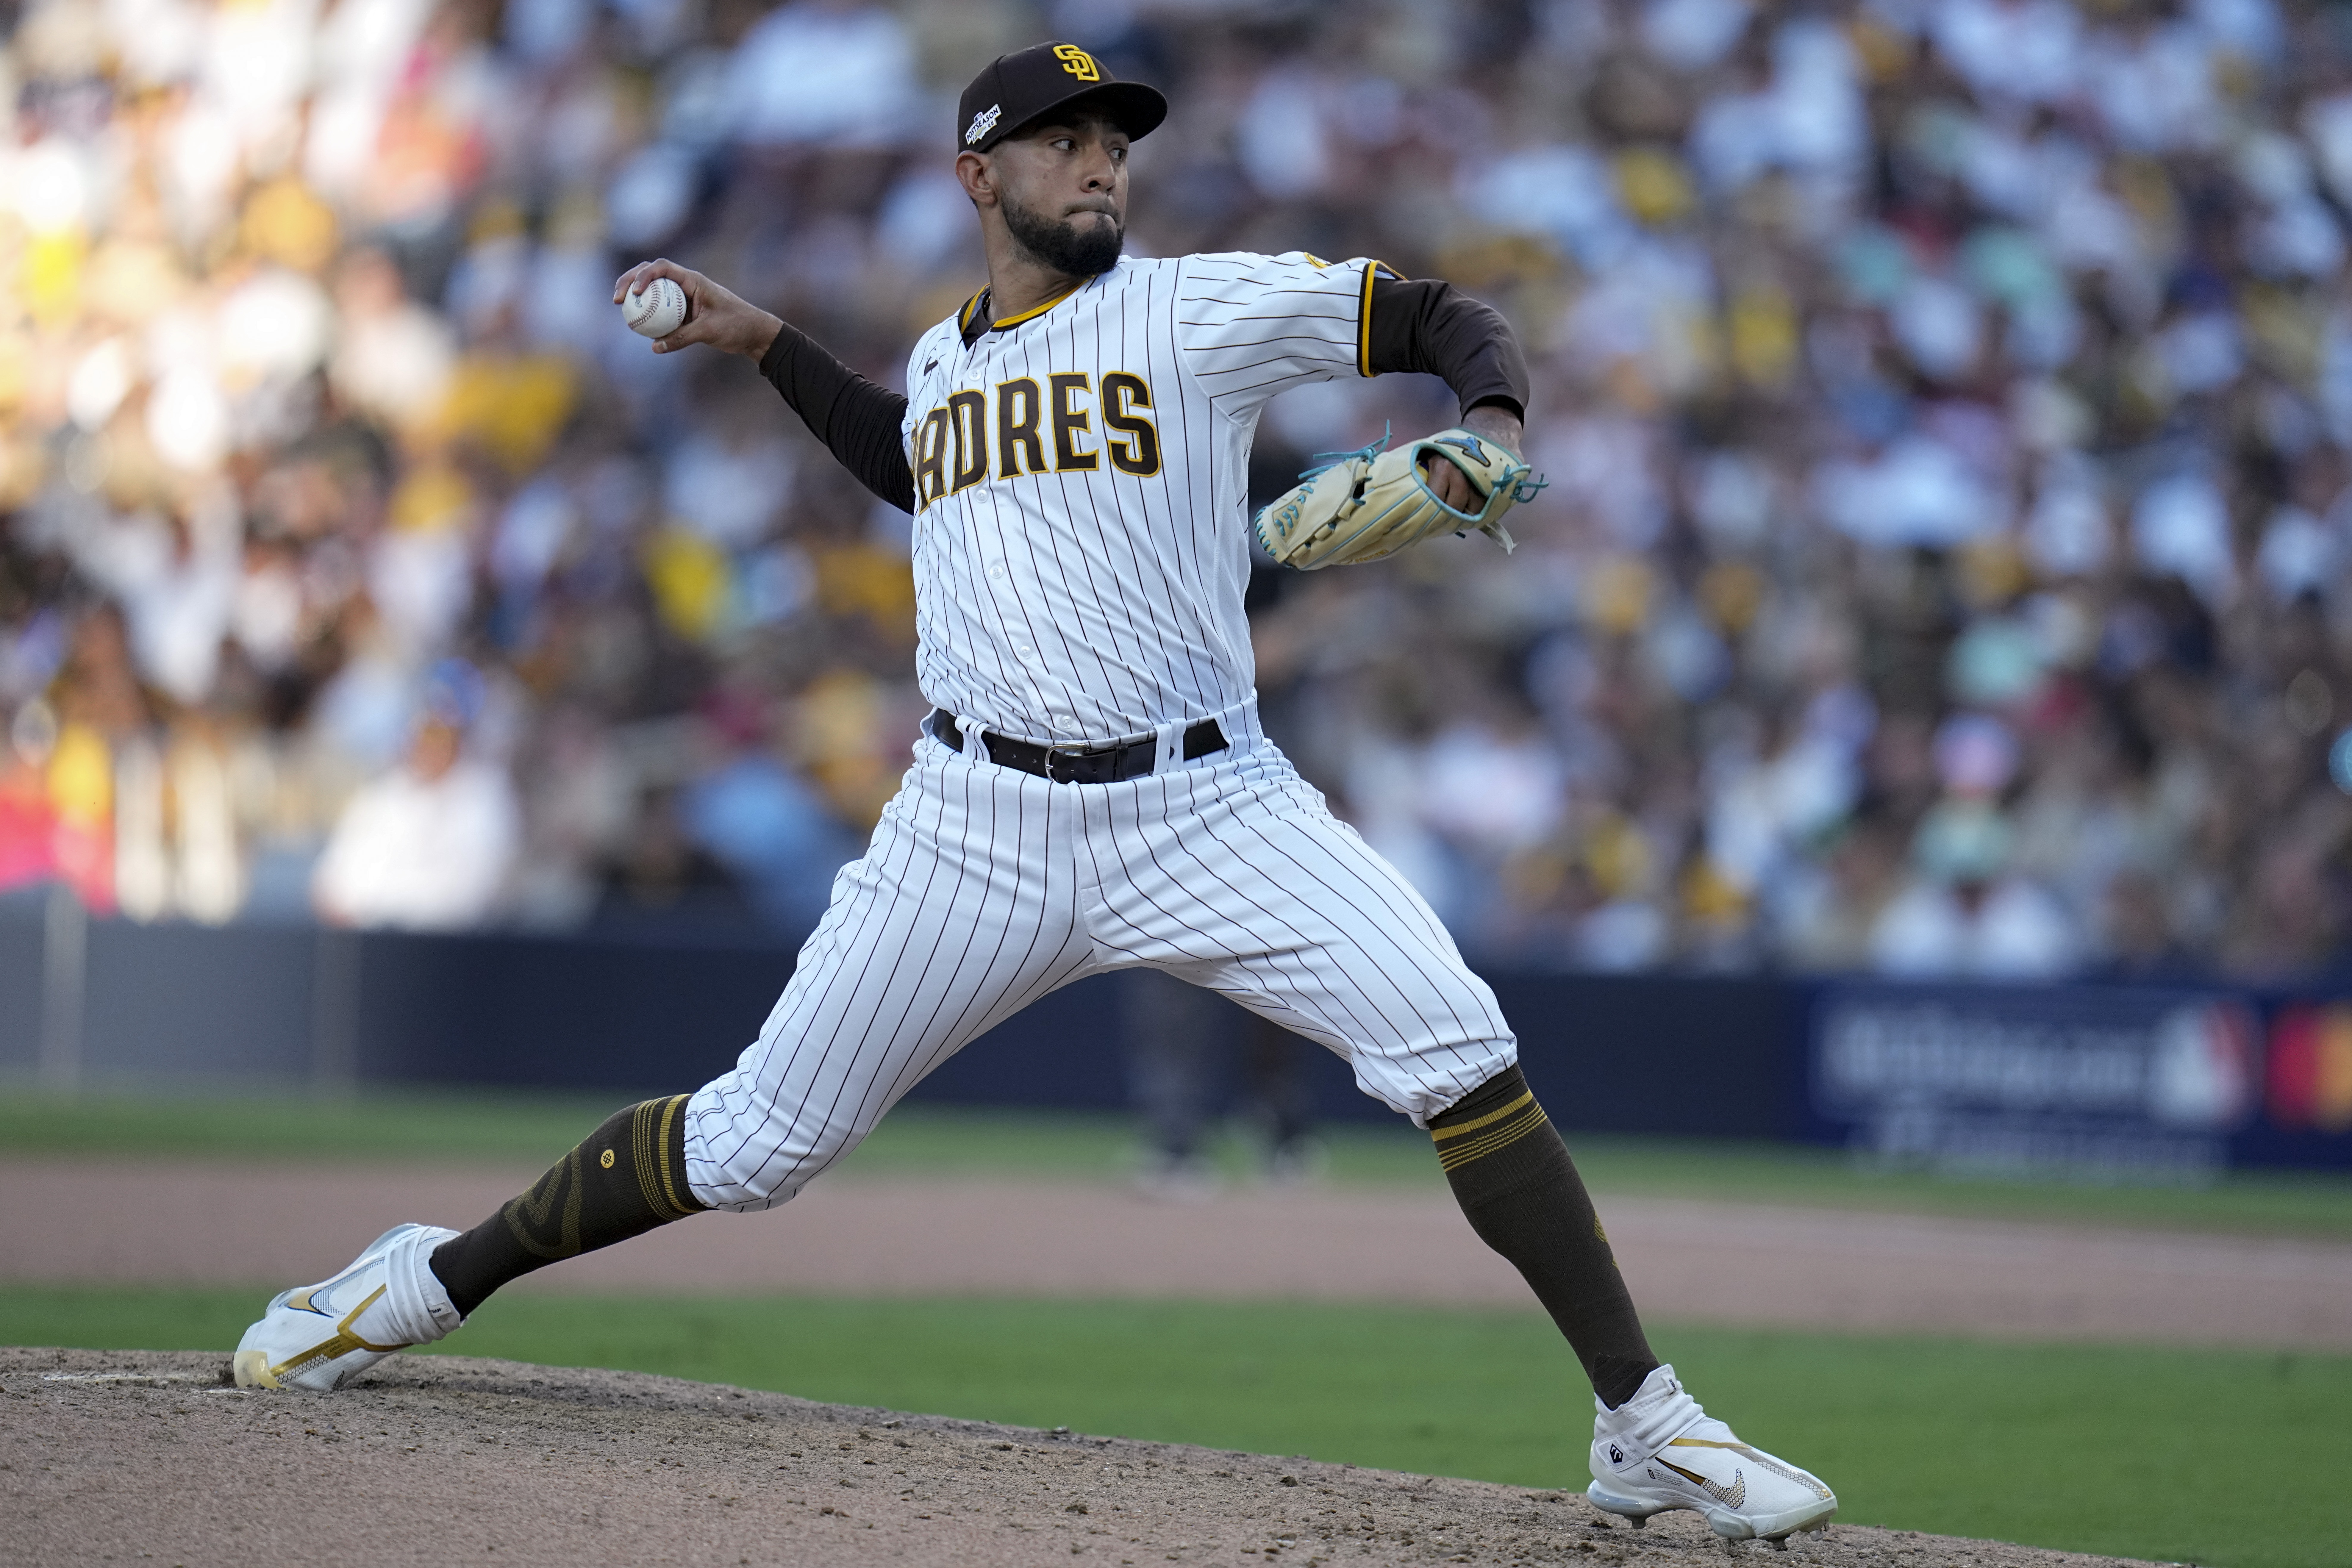 Robert Suarez of the San Diego Padres pitches in the eighth inning